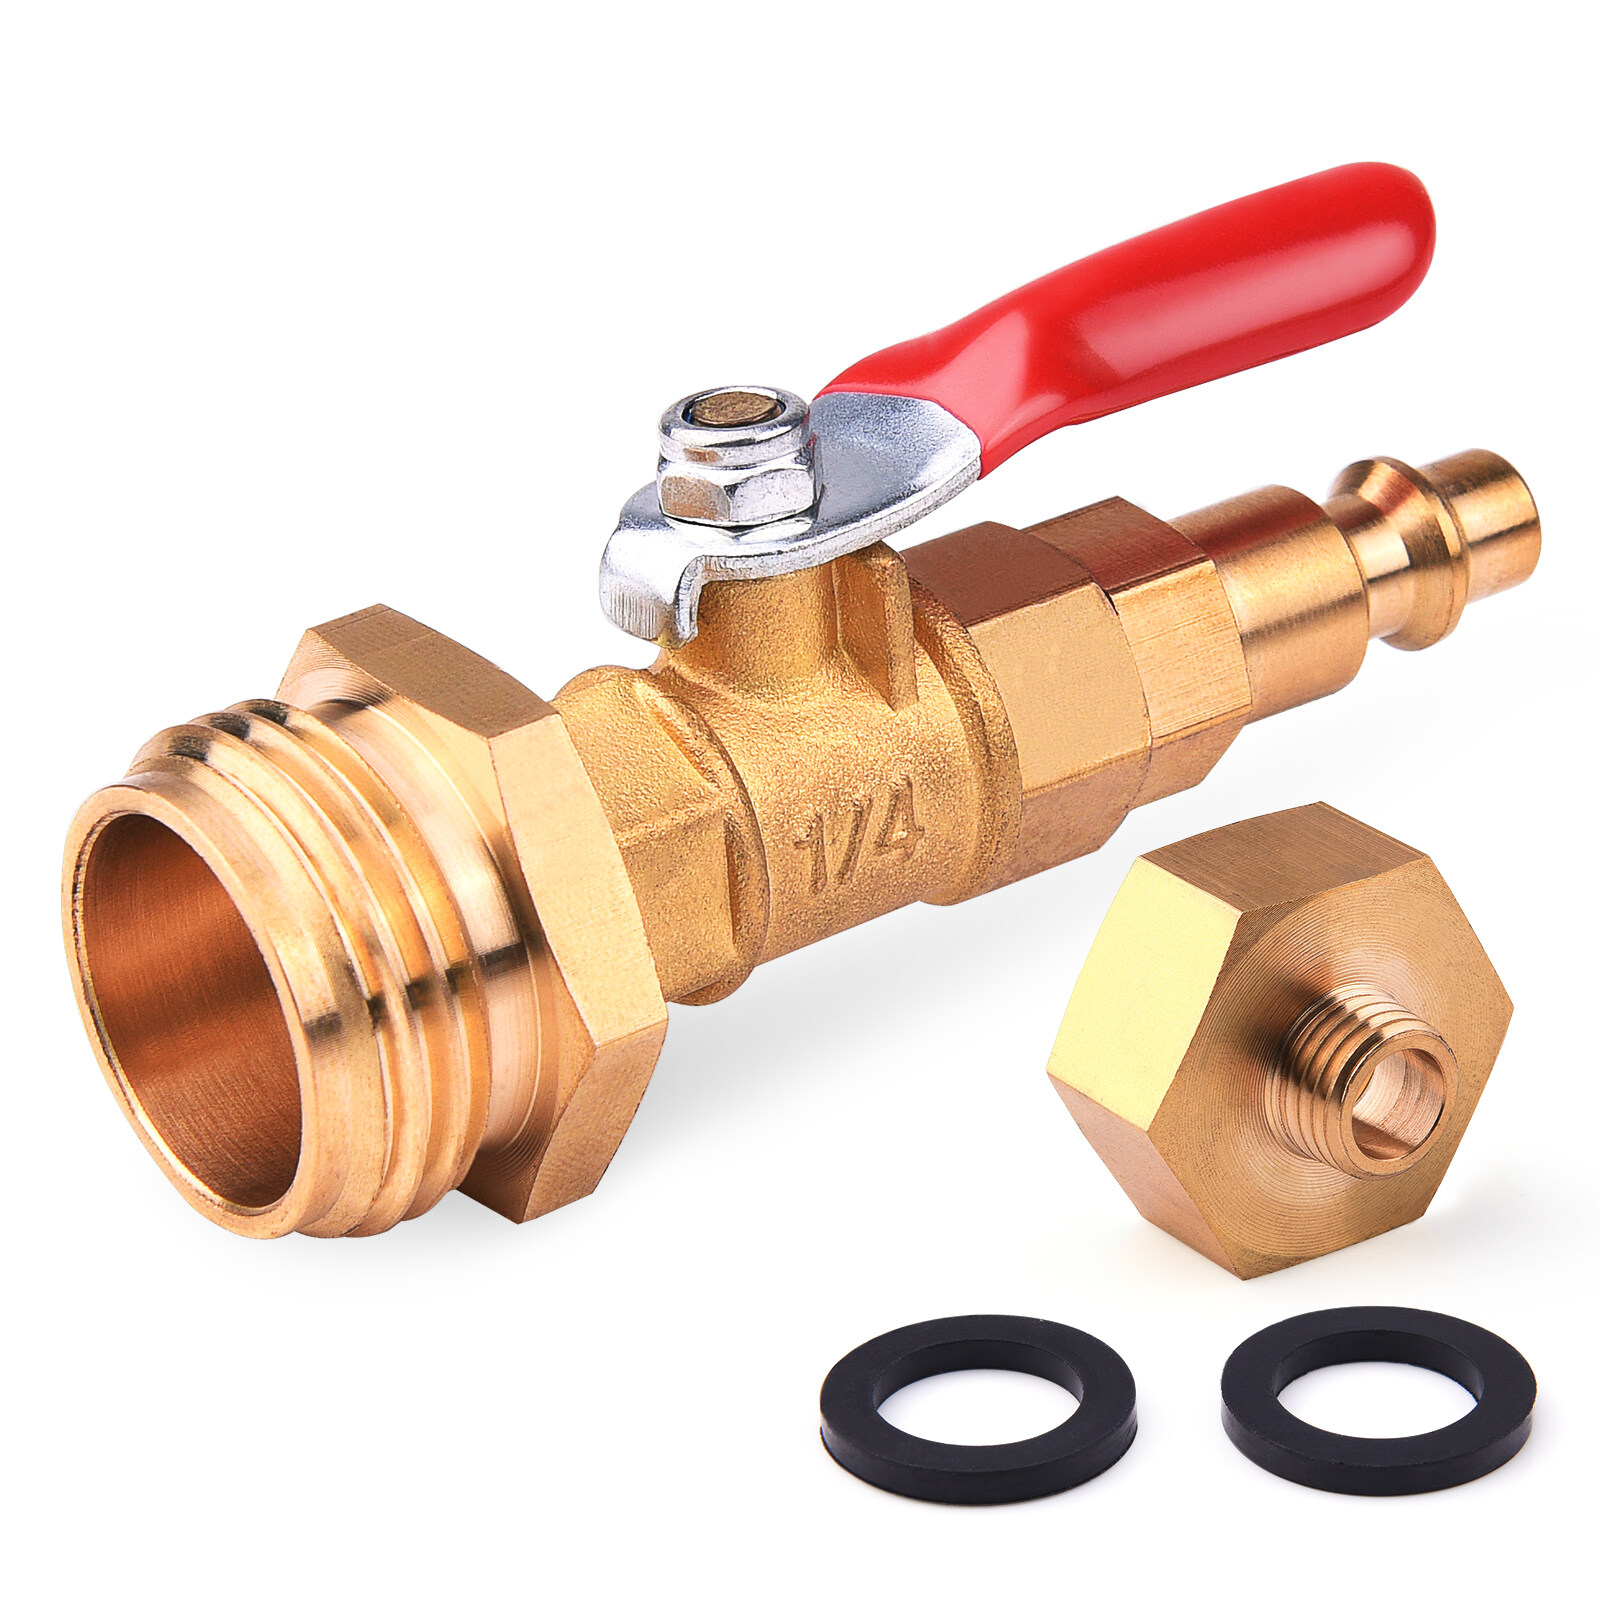 QWORK Winterize Adapter Brass Winterizing Quick Blowout Adapter with Ball Valve with 1/4 Inch Male Quick Connecting Plug and 3/4 inch Male GHT Thread Pack of 2 